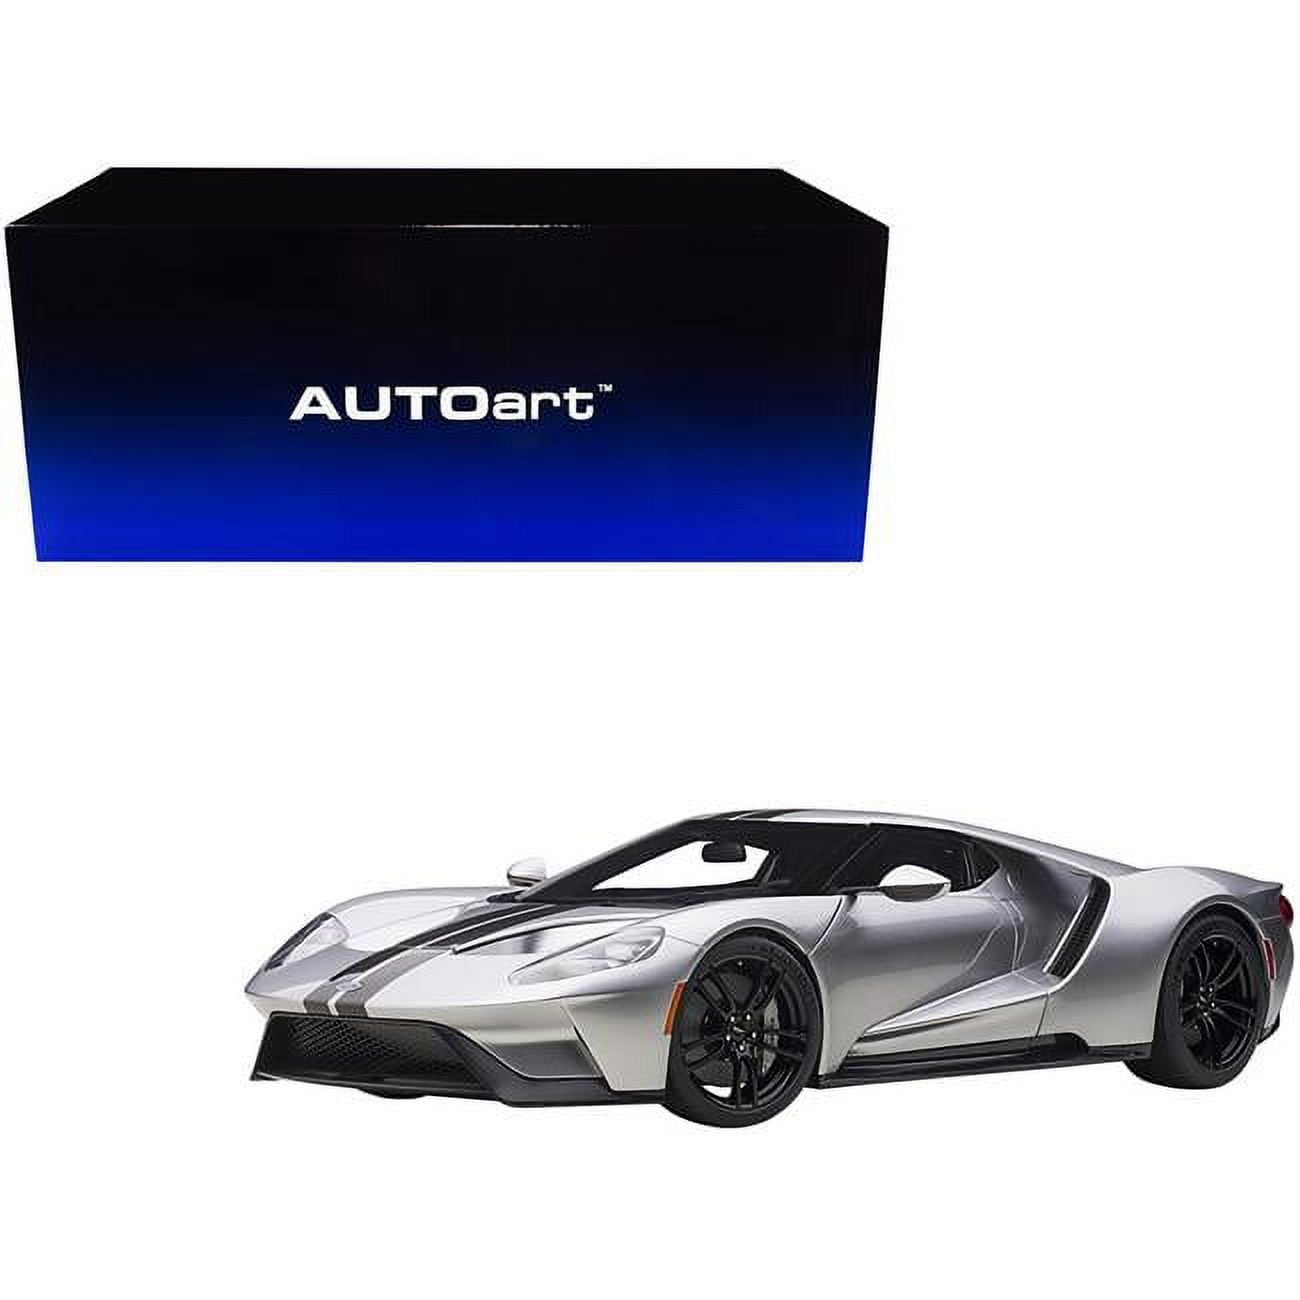 Picture of Autoart 12108 Ingot Silver Metallic with Black Stripes 1 by 12 Scale Model Car for 2017 Ford GT